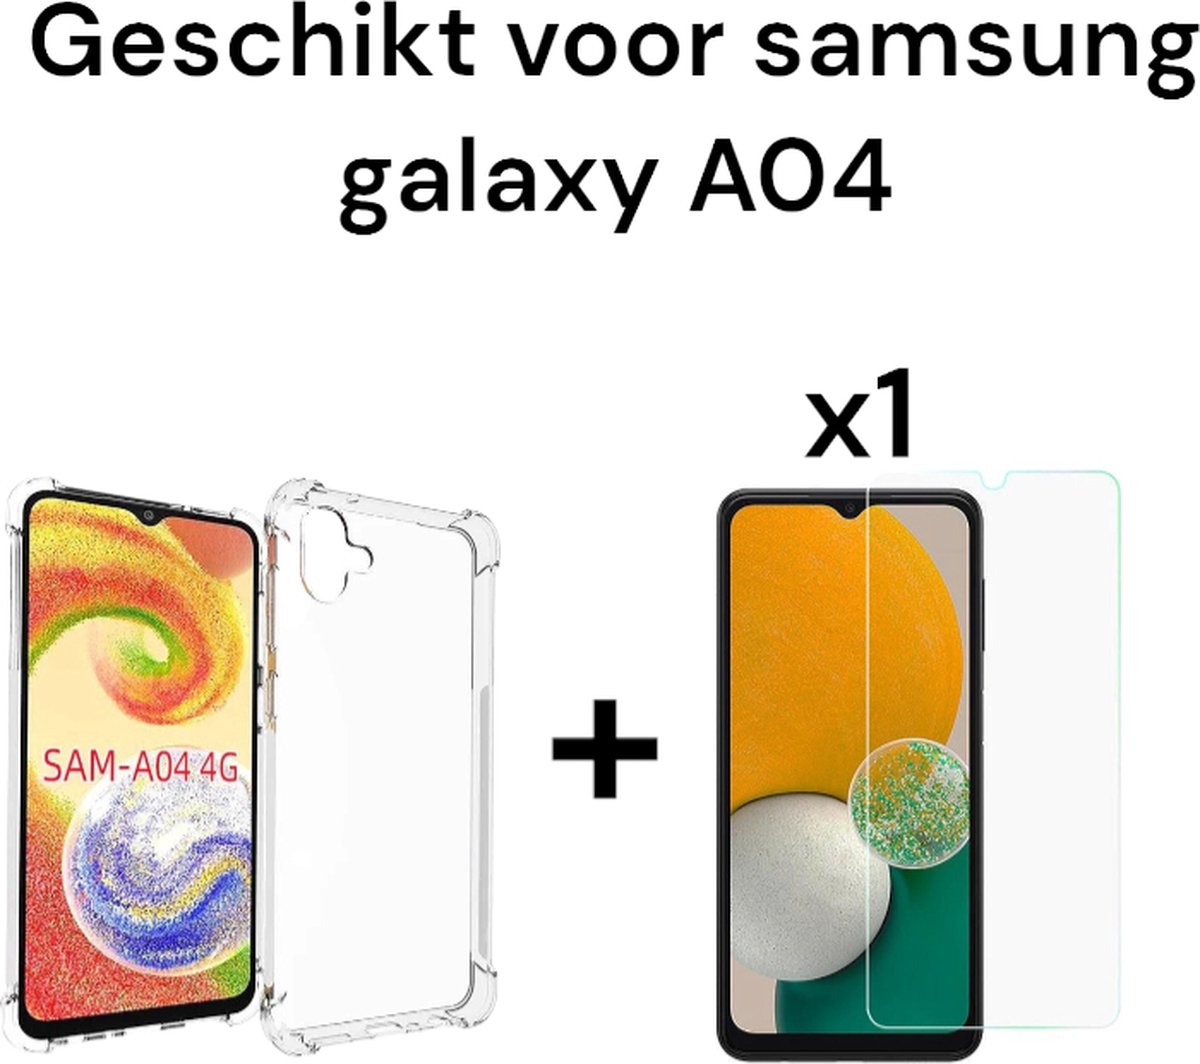 samsung galaxy a04 hoesje siliconen transparant antishock achterkant +1x screen protectorsamsung galaxy a04s hoesje siliconen schock proof doorzichtig back cover +1x tempered glass